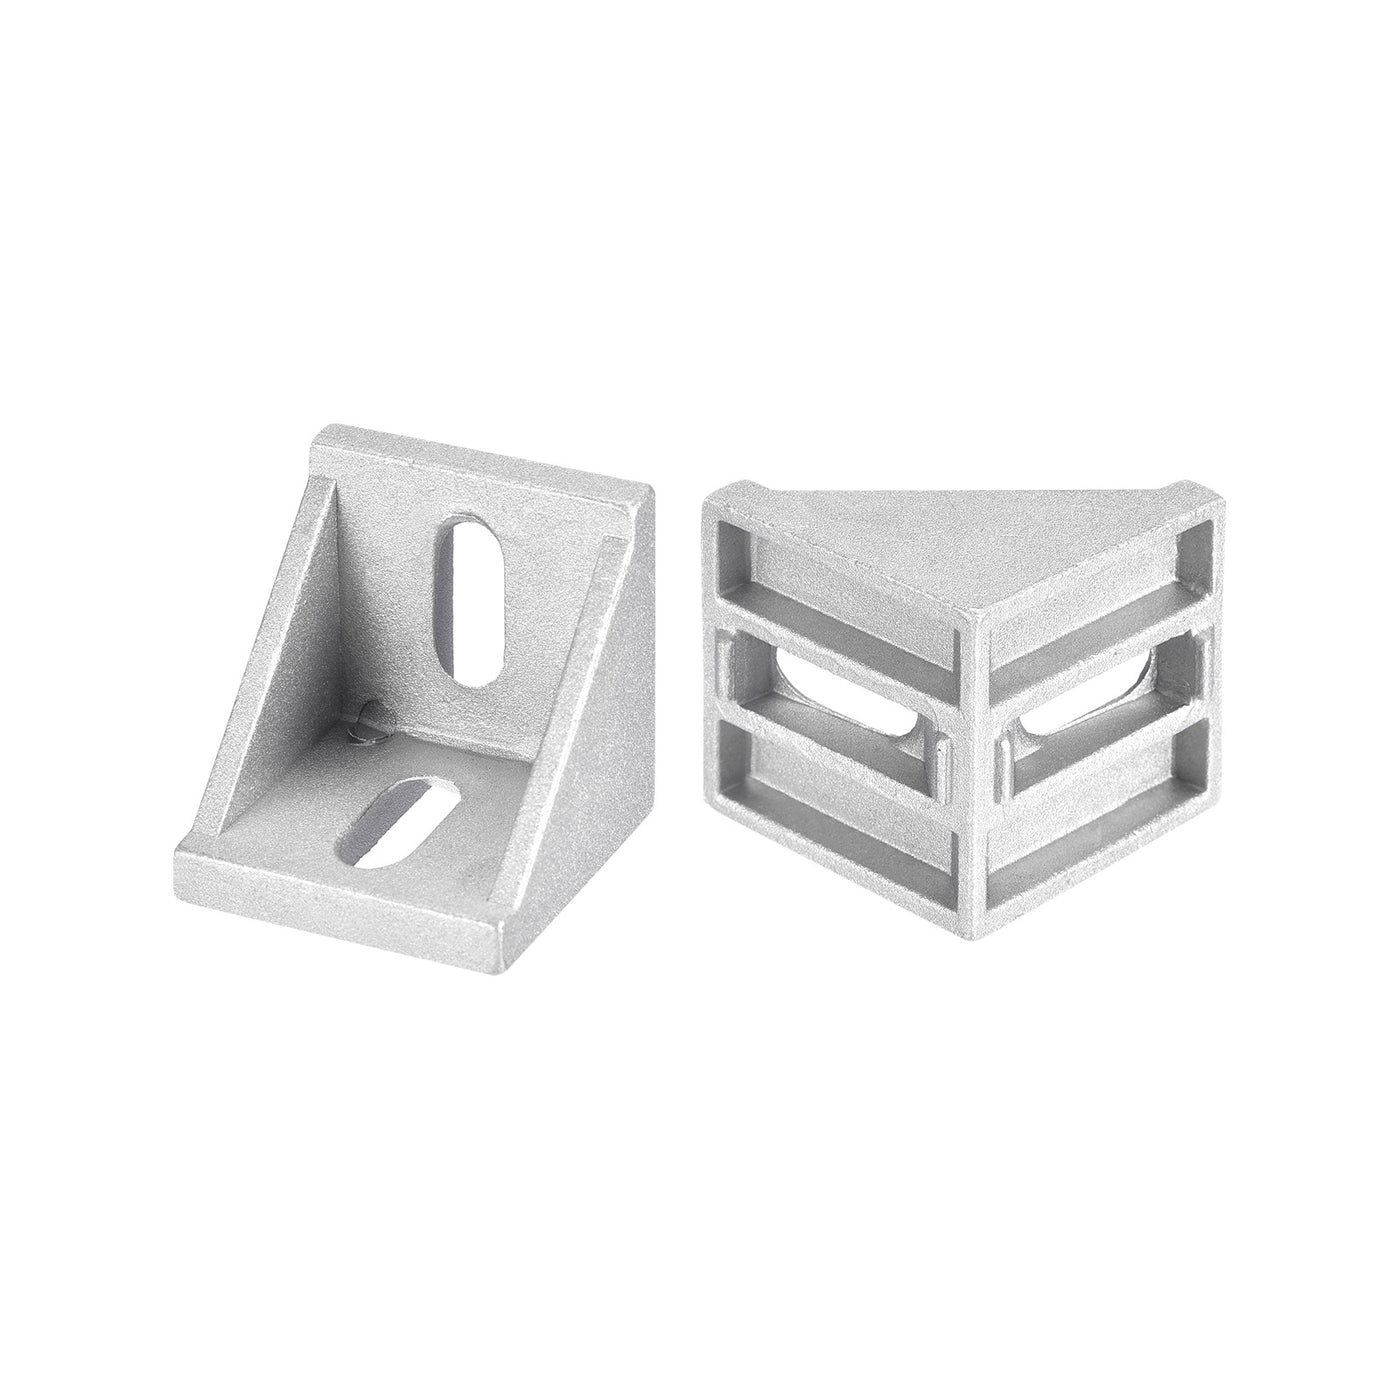 uxcell Uxcell 8Pcs Inside Corner Bracket Gusset, 42x42x41mm 4545 Angle Connectors for 4545/5050 Series Aluminum Extrusion Profile Silver